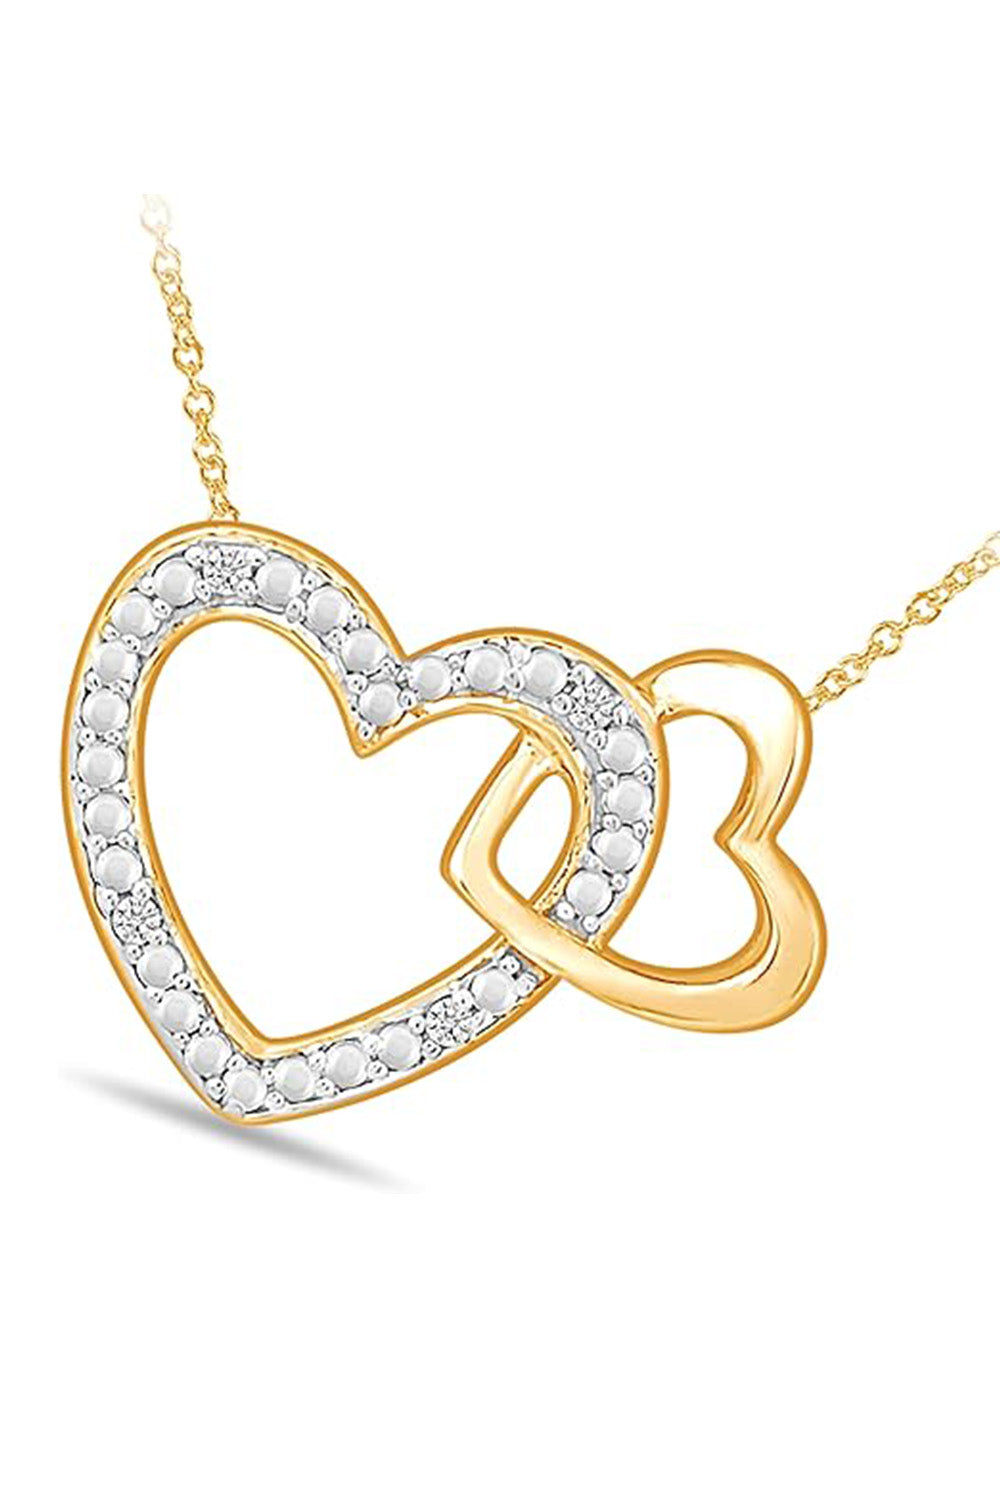 Yellow Gold Color Interlocking Double Heart Pendant Necklace 